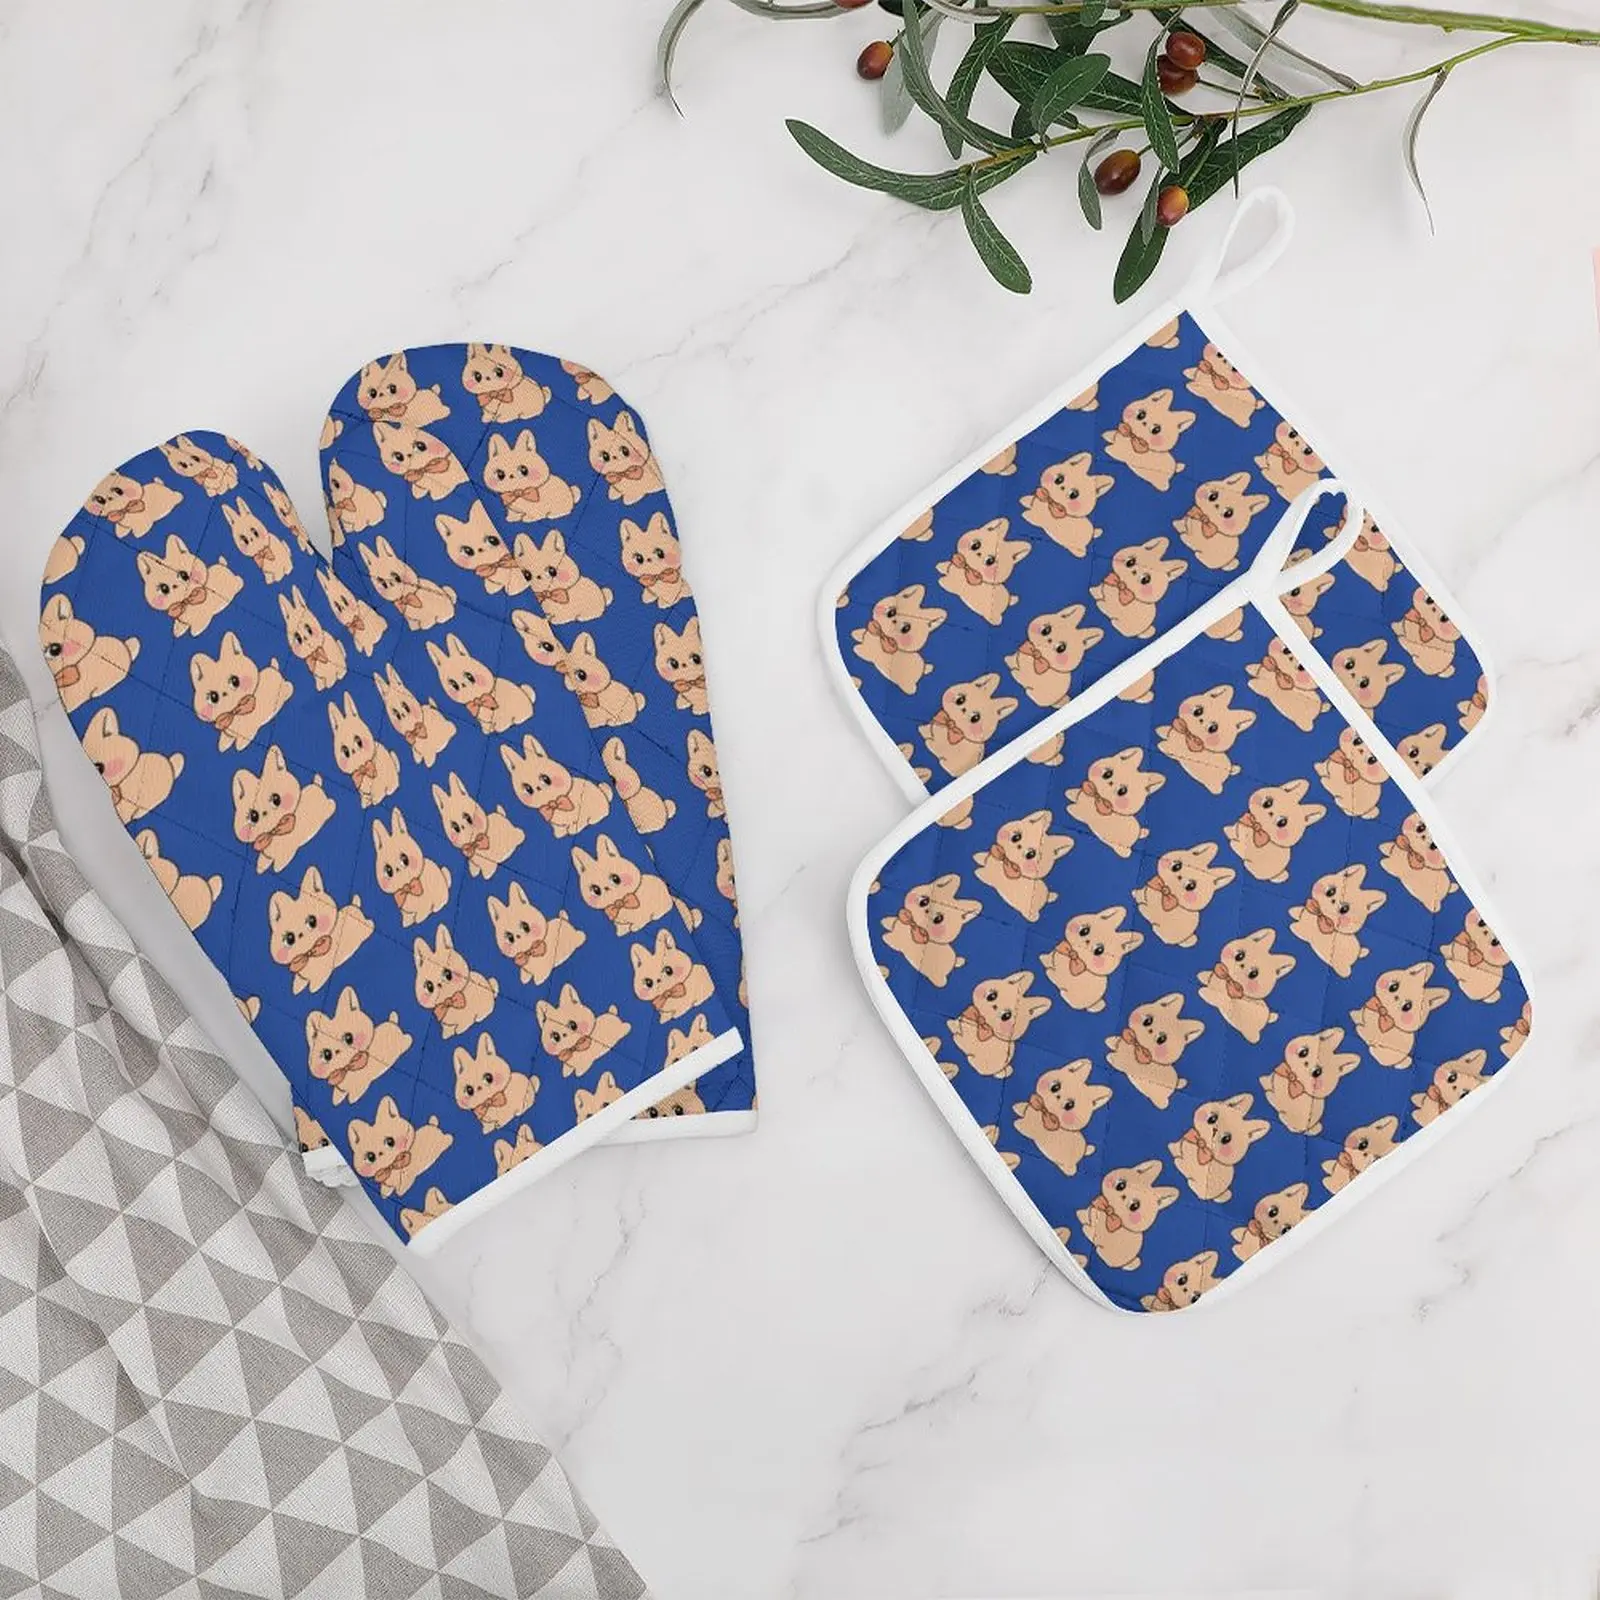 

Cartoon-bunny-dark Blue-repeat Oven Mitts and Pot Holders Heat Resistant Oven Gloves for Kitchen Safe Cooking Baking Grilling